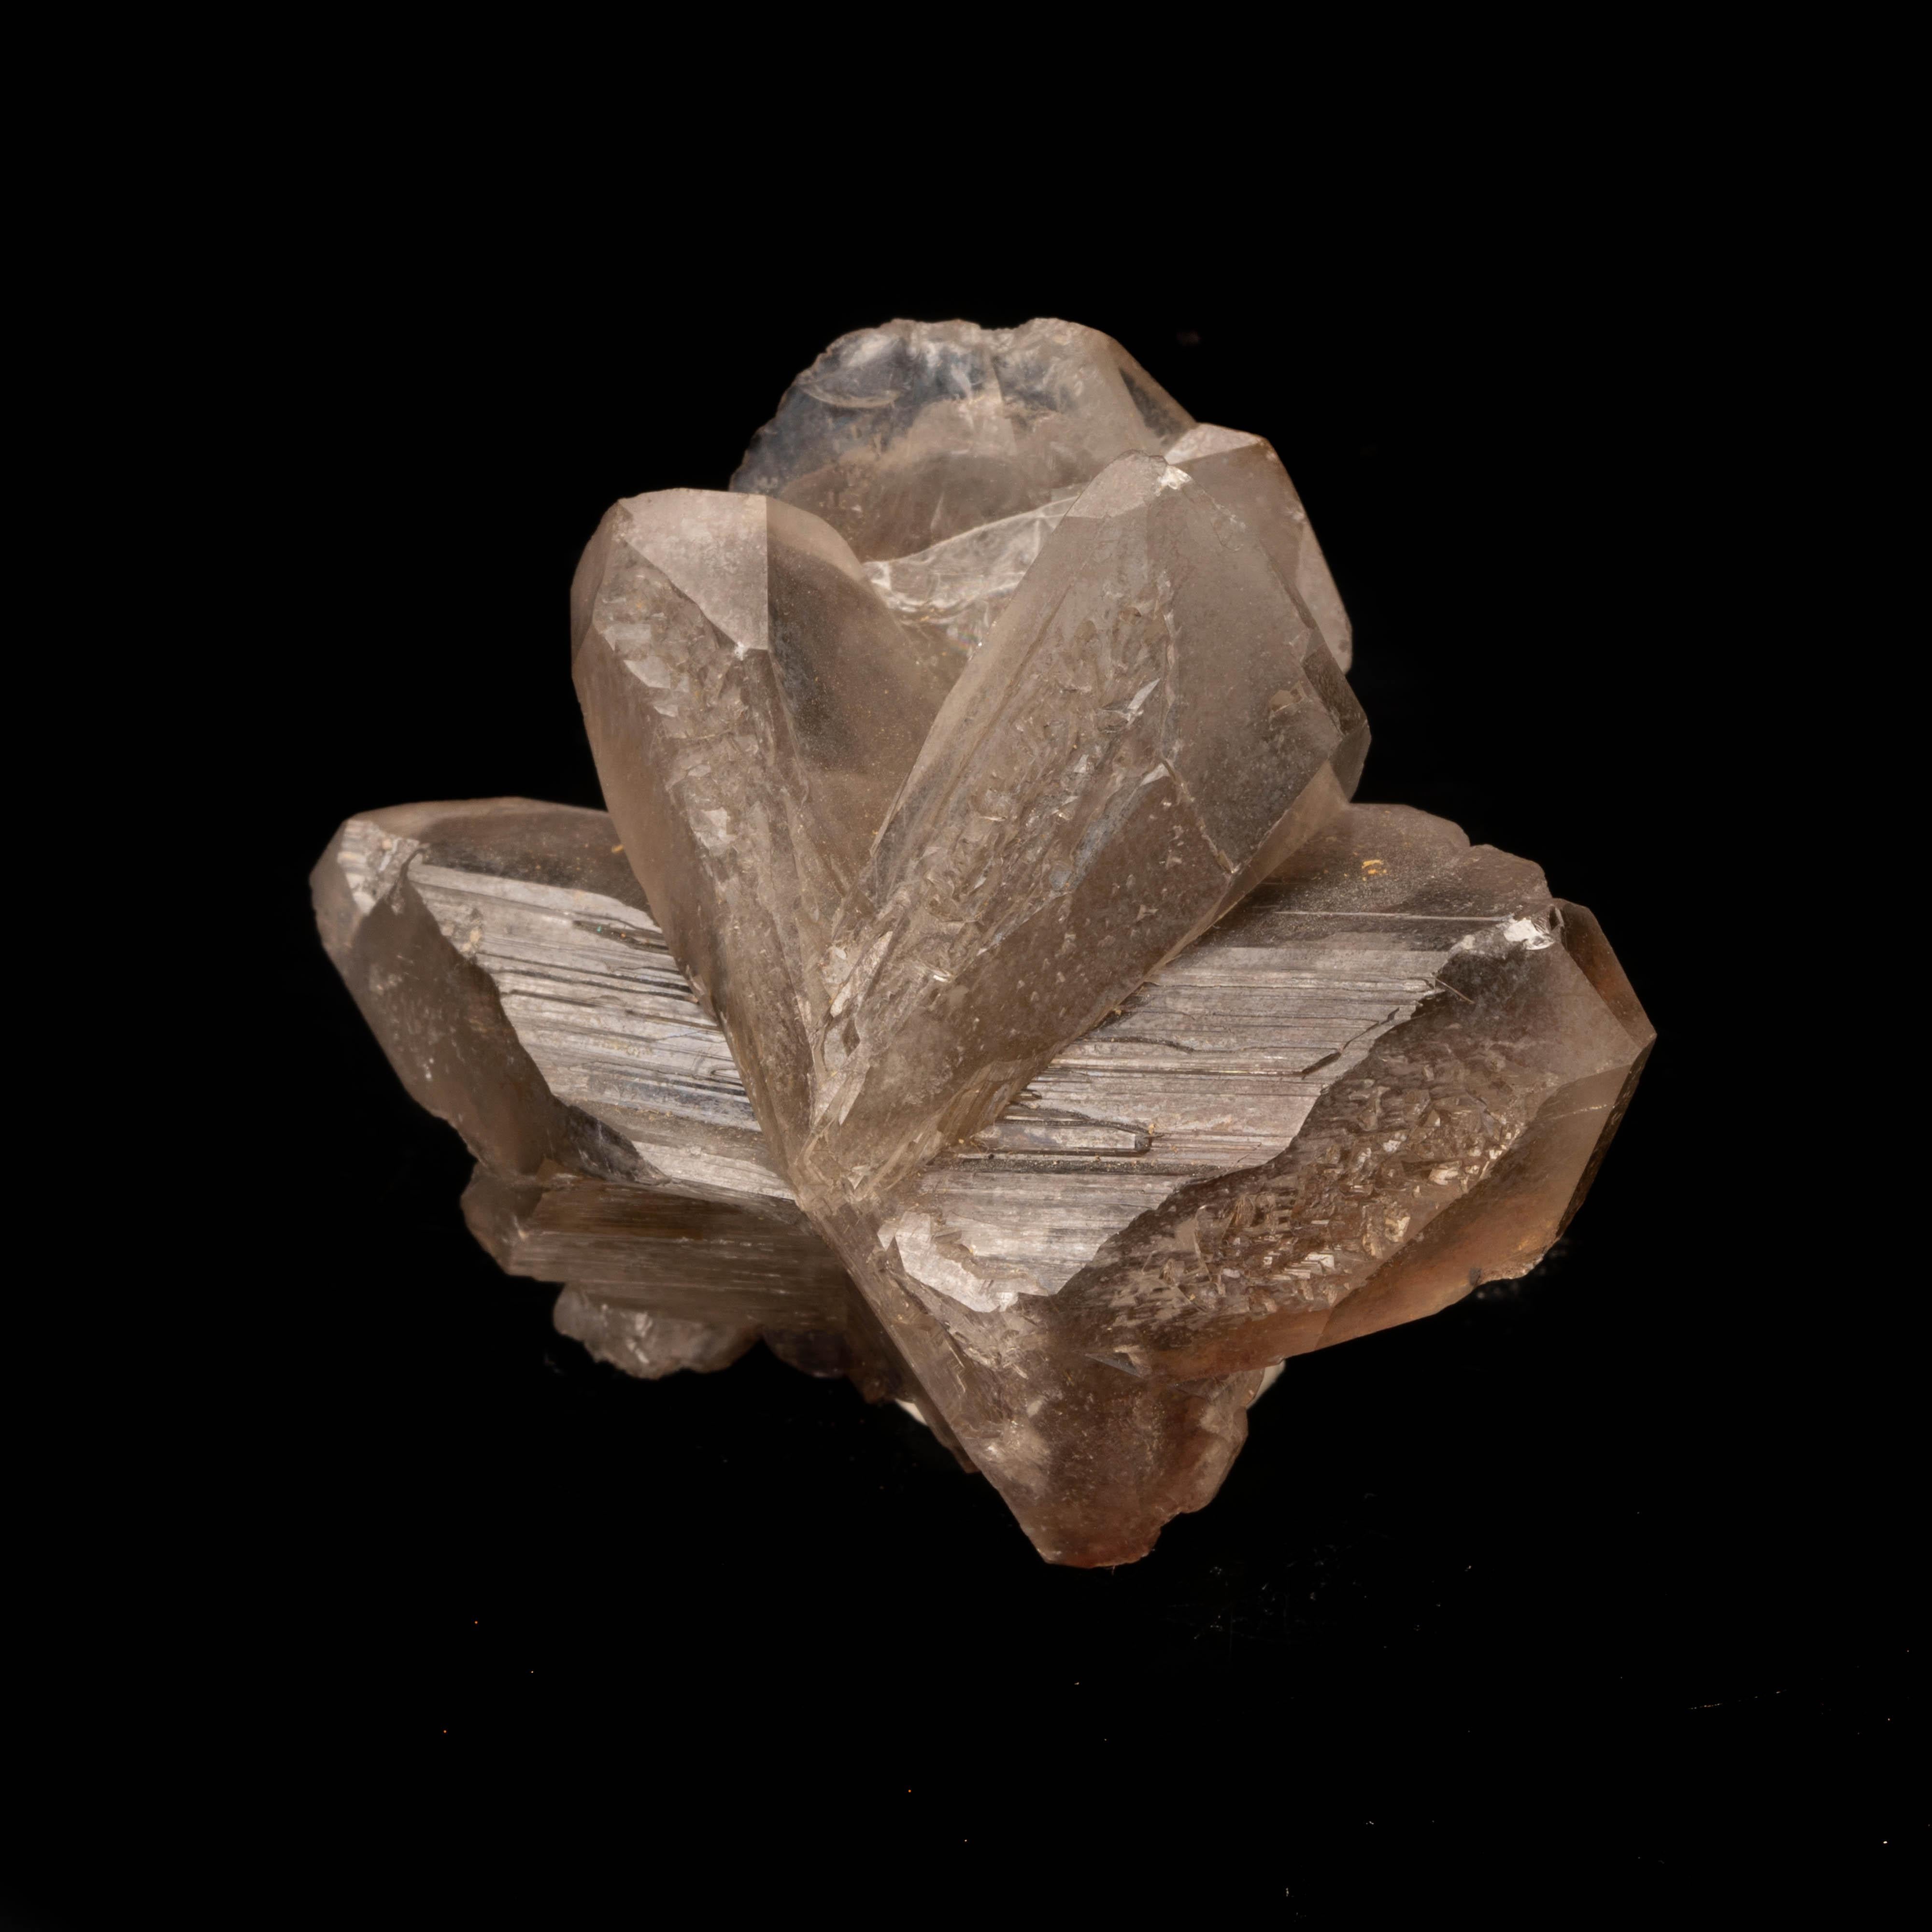 This genuine sixling twin or cerussite gem crystals twinned on all axes to form a twinned cluster with six points comes out of the Tsumeb Mine, Tsumeb, Oshikoto Region, Namibia. Gem-quality cerussite from this location is hard to come by and prized